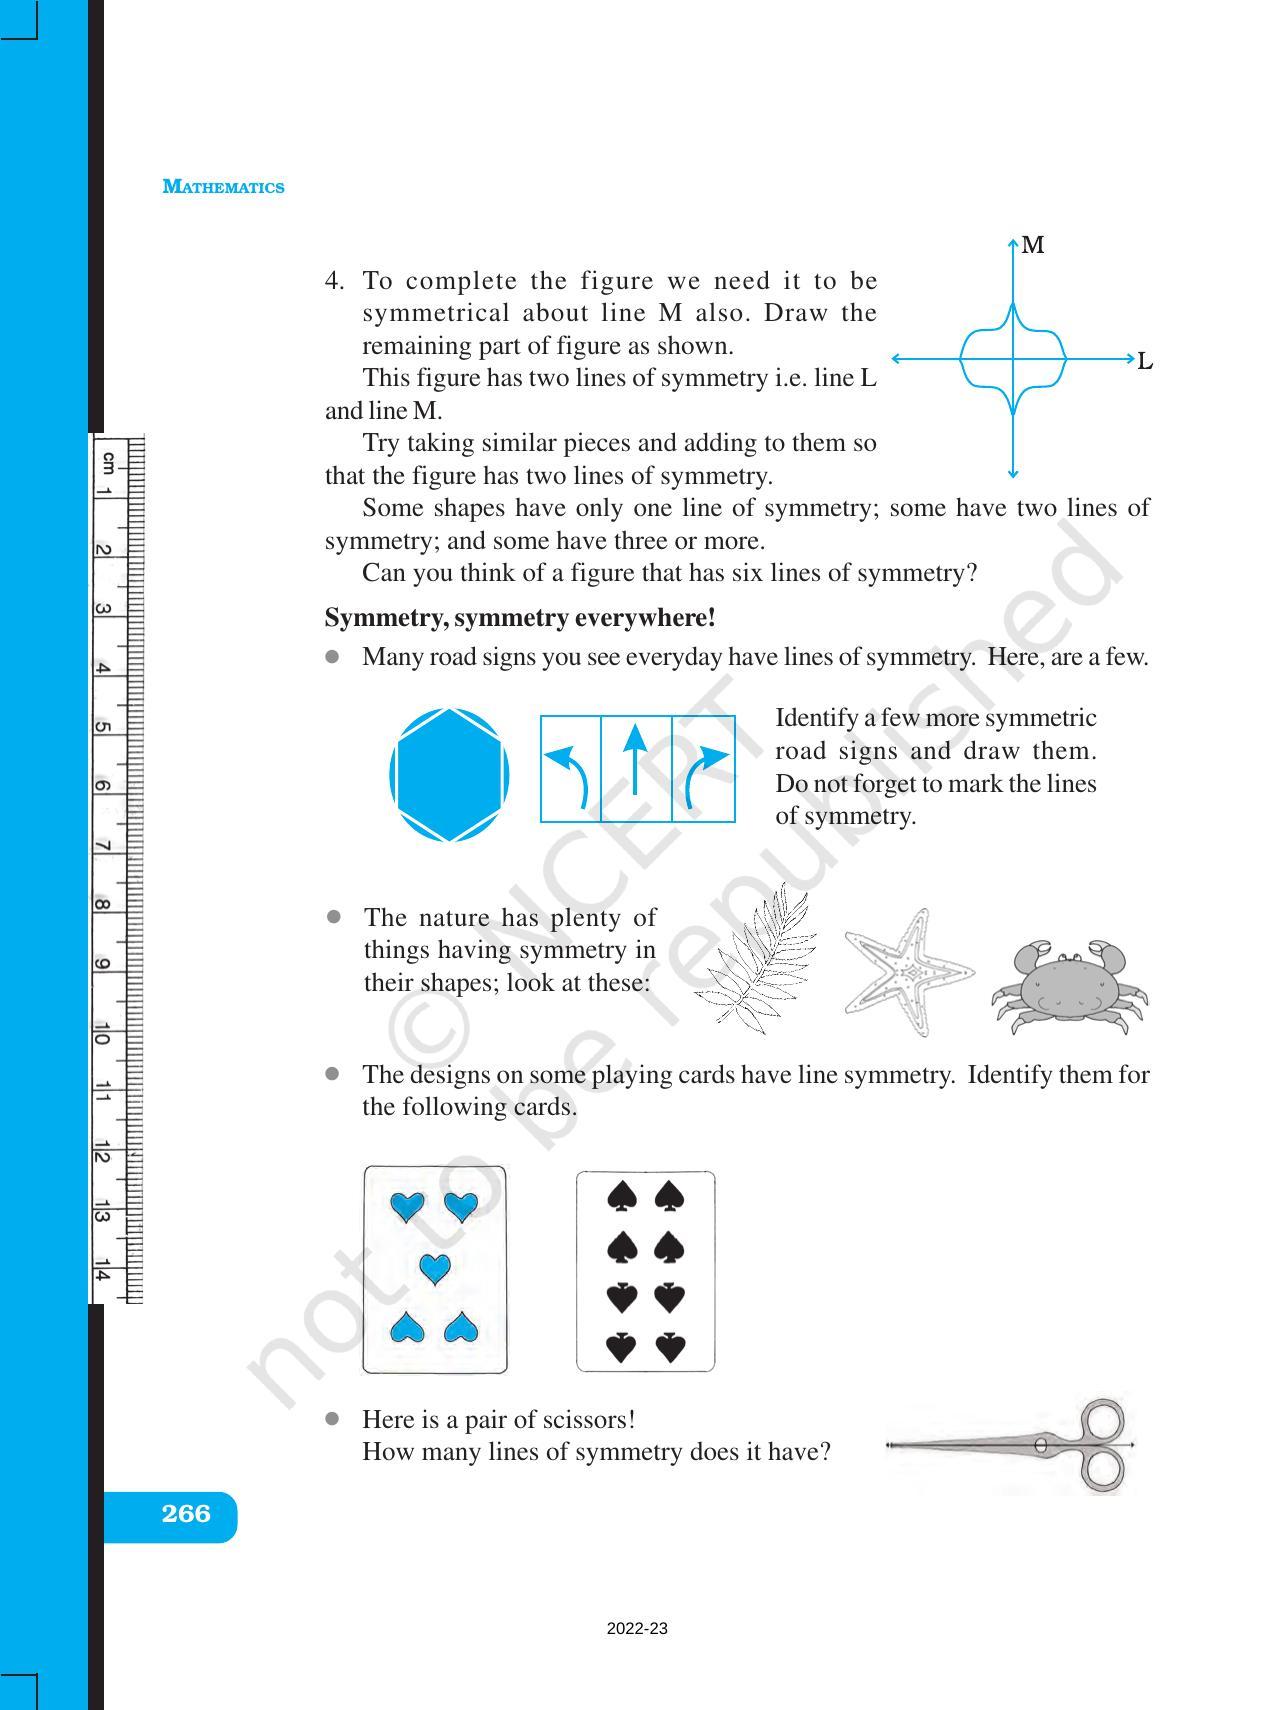 NCERT Book for Class 6 Maths: Chapter 13-Symmetry - Page 6